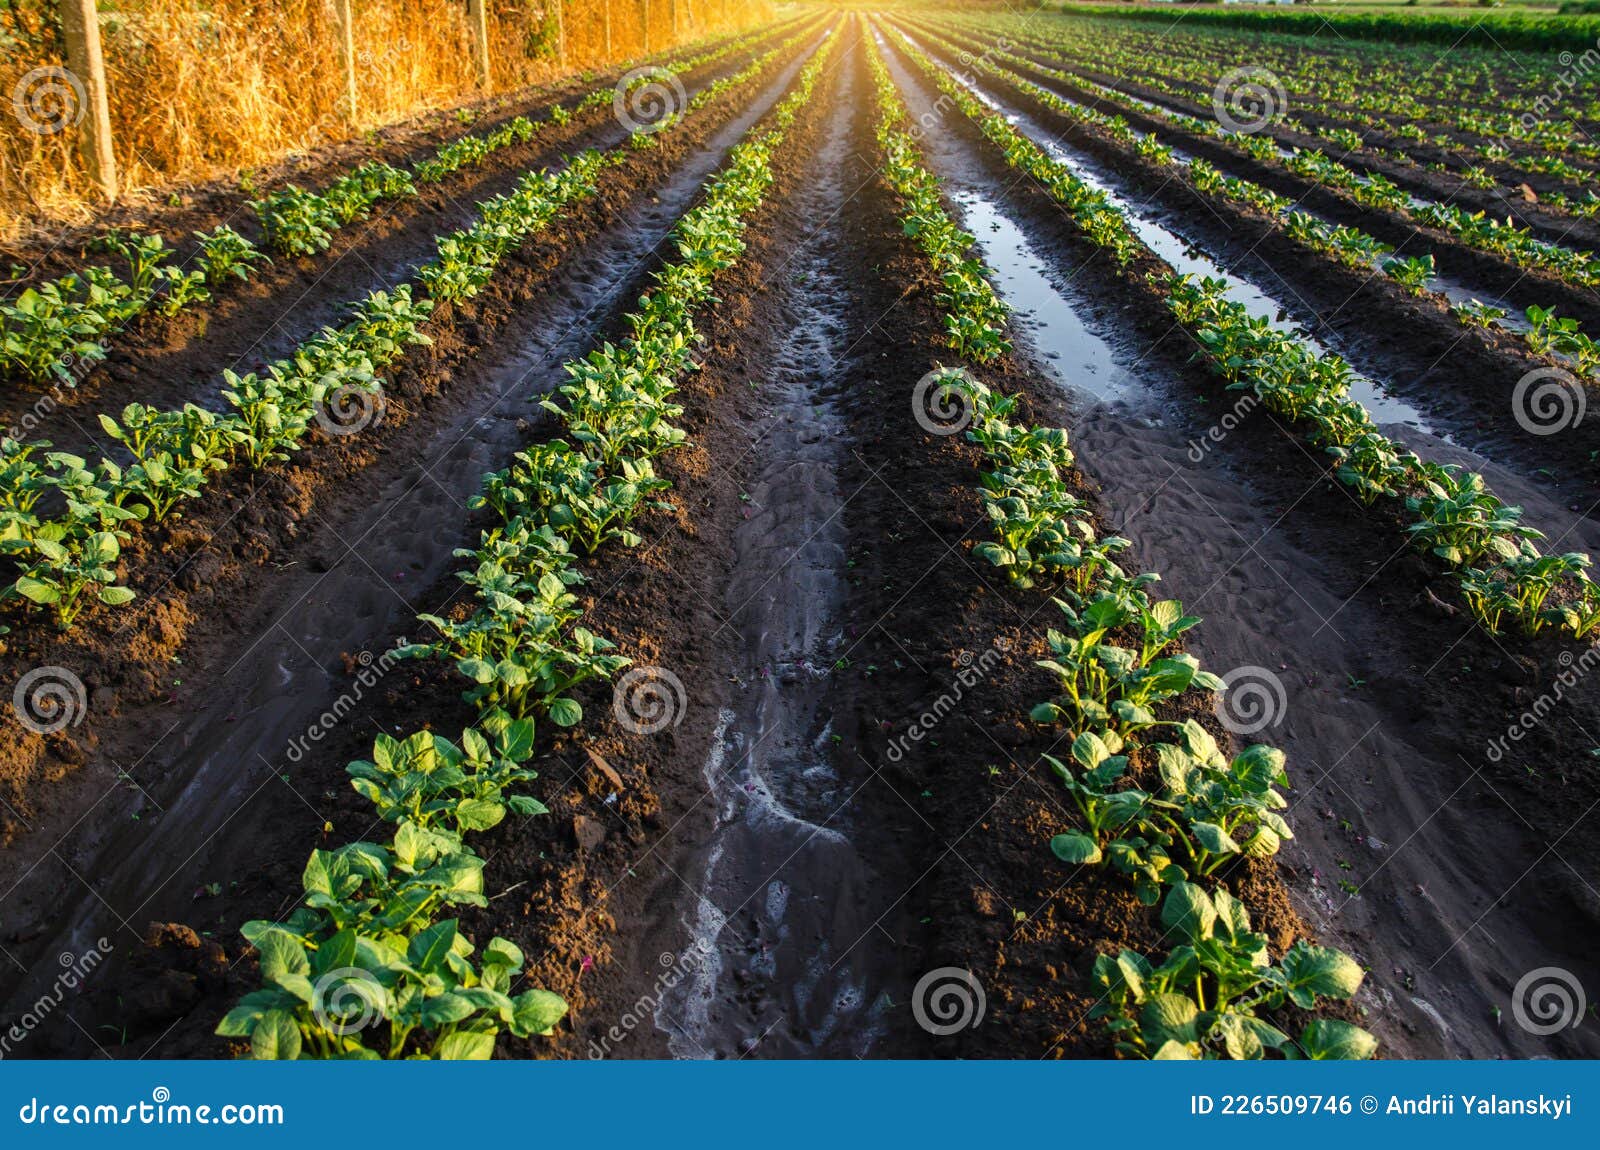 wet soil on a potato plantation in the early morning. rain and precipitation. surface irrigation of crops on plantation.